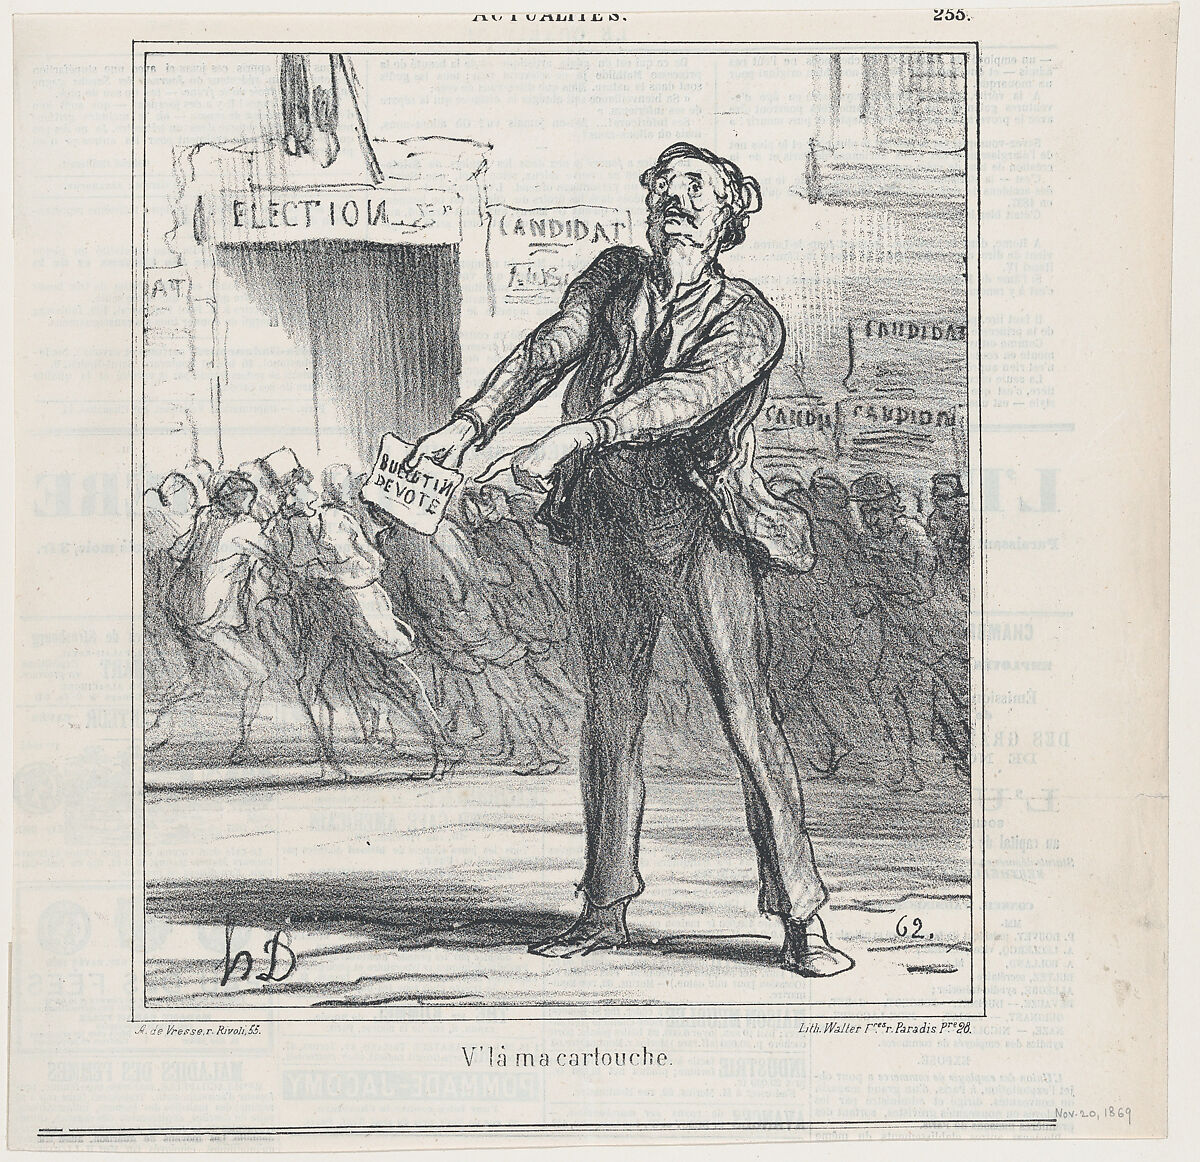 This is my "bullet," from 'News of the day,' published in Le Charivari, November 20, 1869, Honoré Daumier (French, Marseilles 1808–1879 Valmondois), Lithograph on newsprint; second state of two (Delteil) 